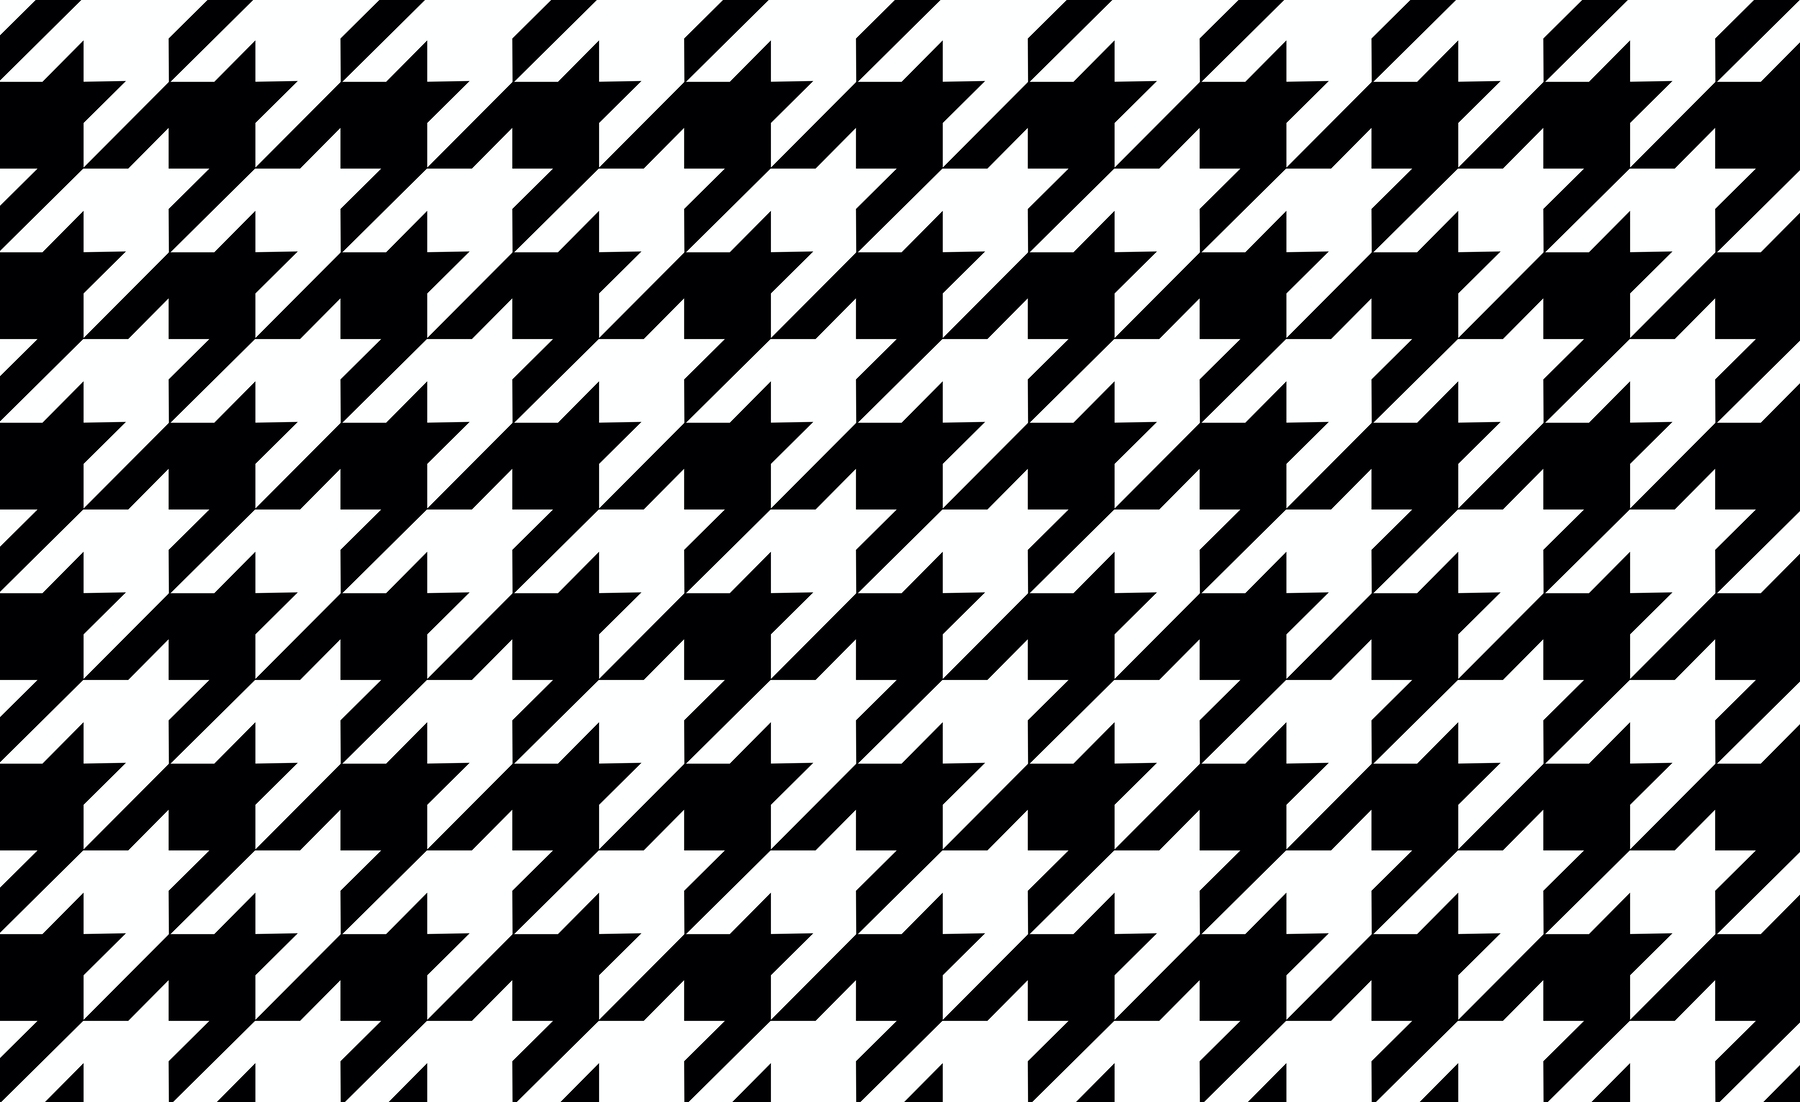 Buy Houndstooth wallpaper US shipping at Happywall.com